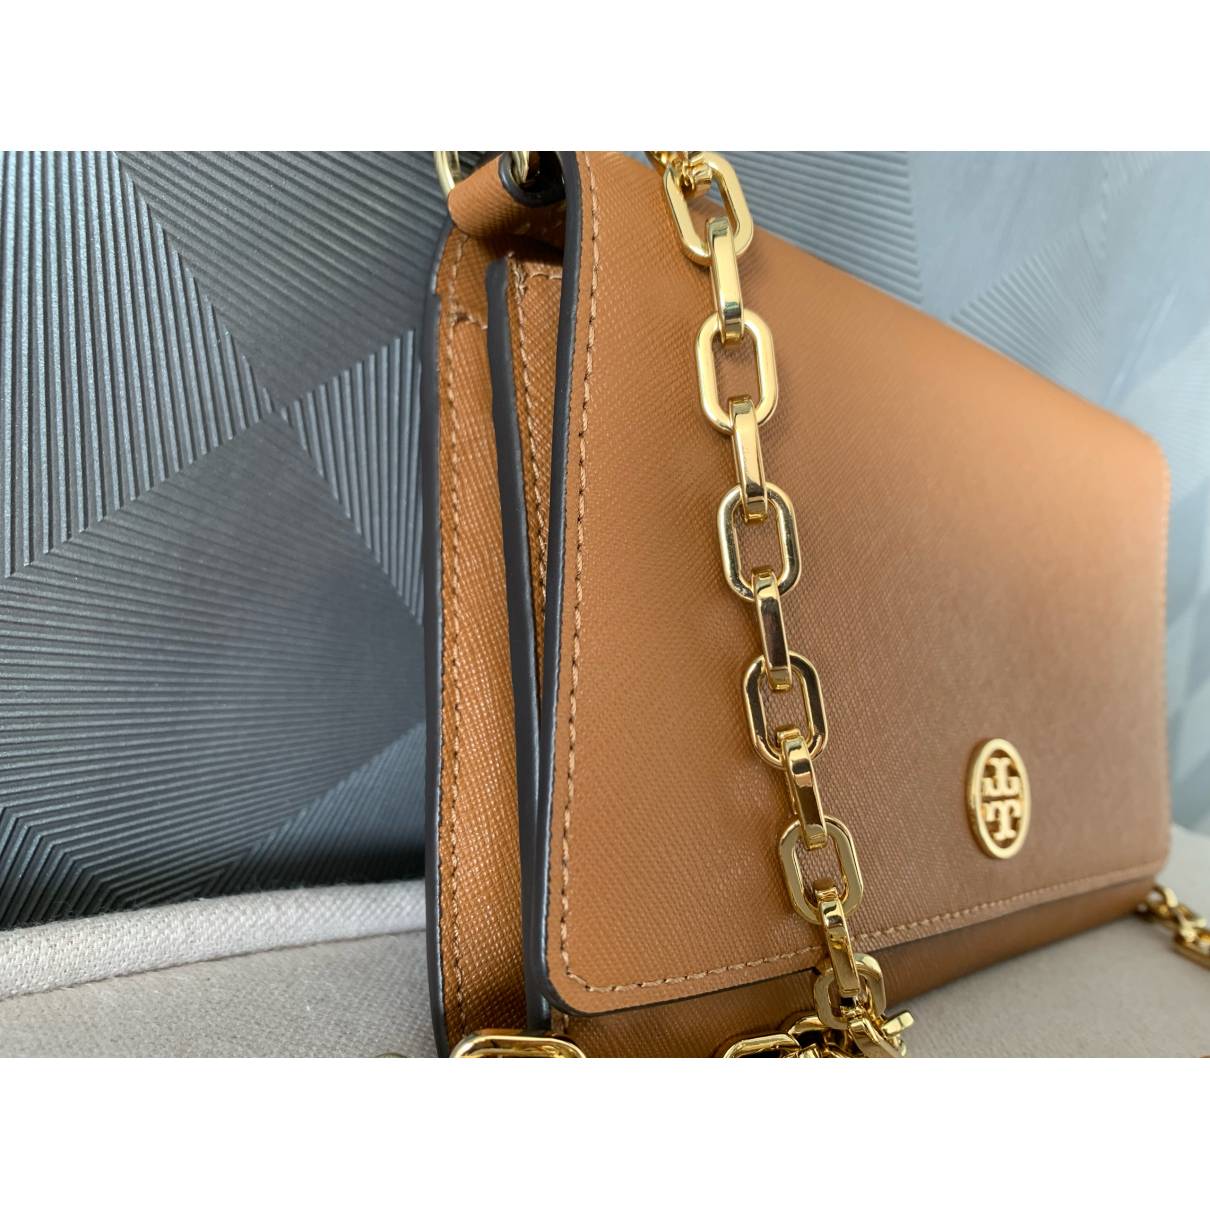 Leather crossbody bag Tory Burch Camel in Leather - 17226534